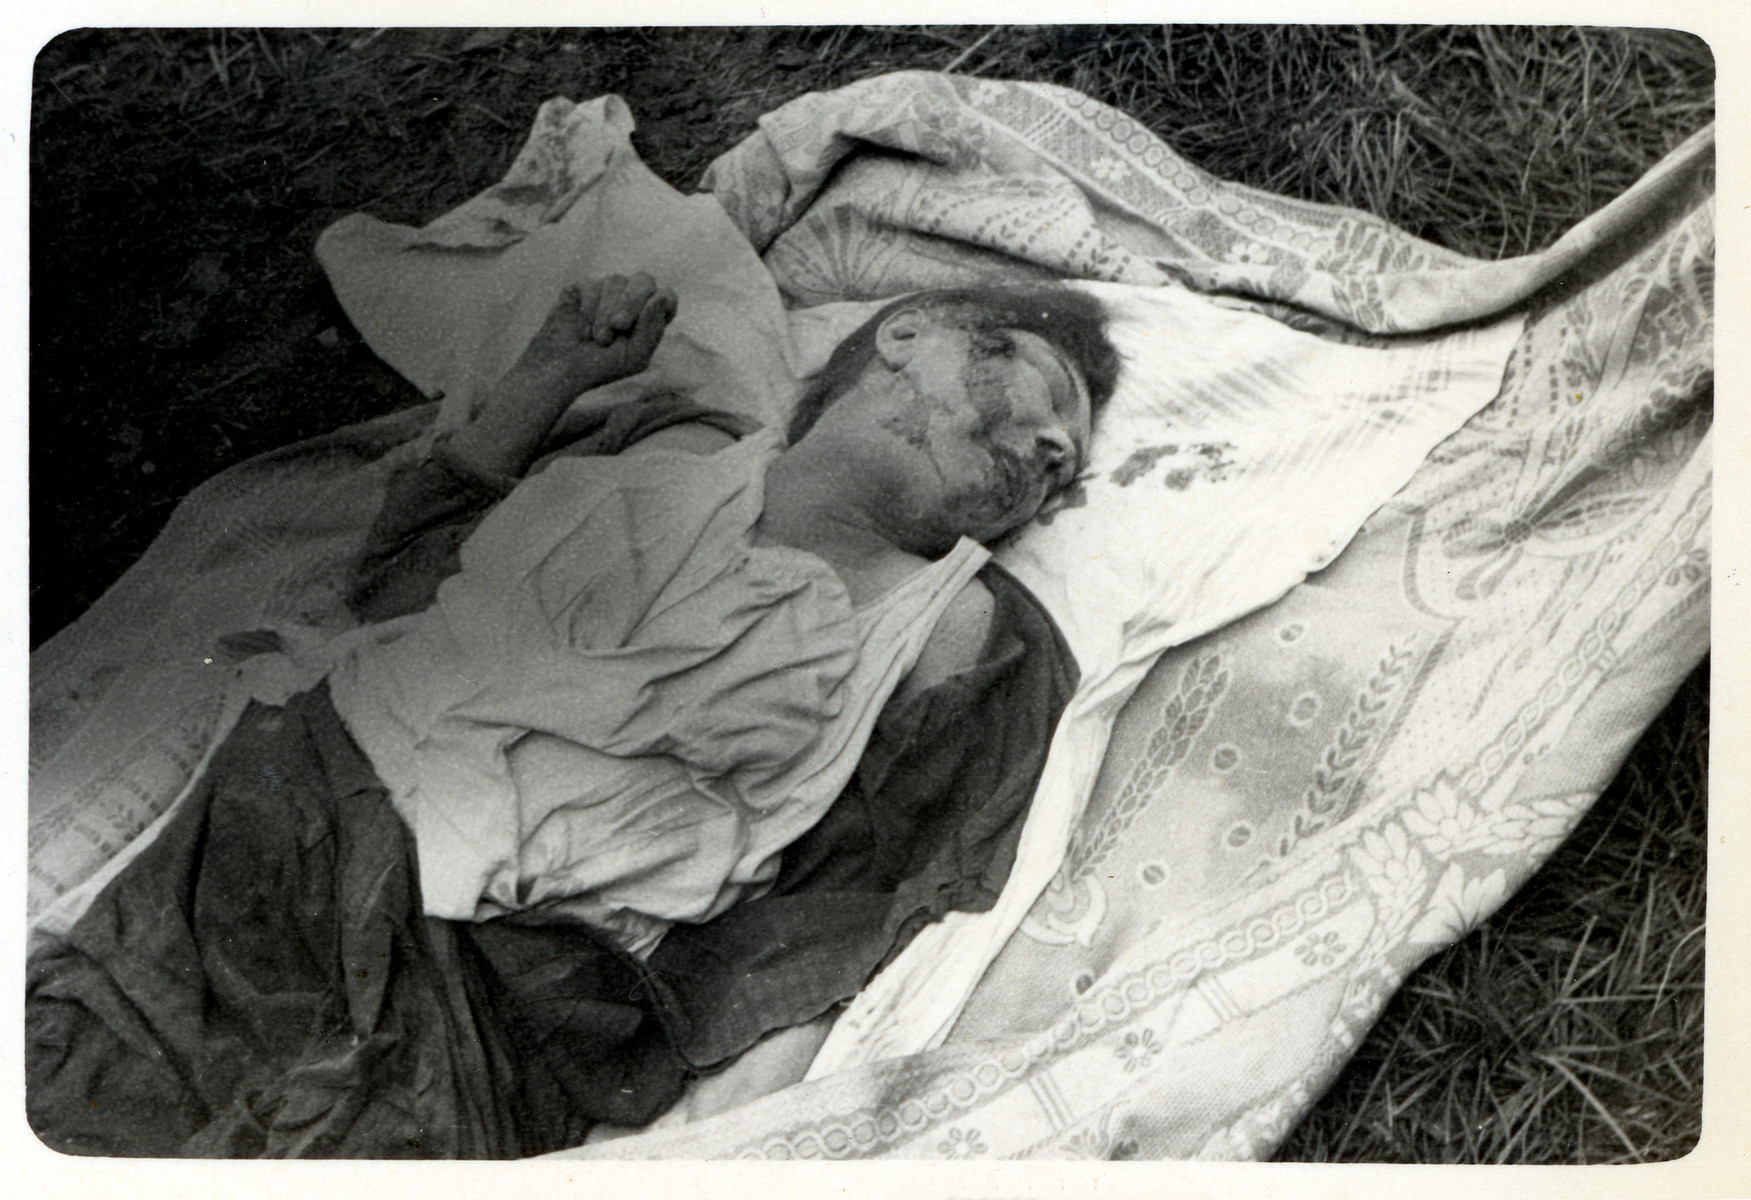 The corpse of a Polish victim of a German air raid lies on the ground in besieged Warsaw.